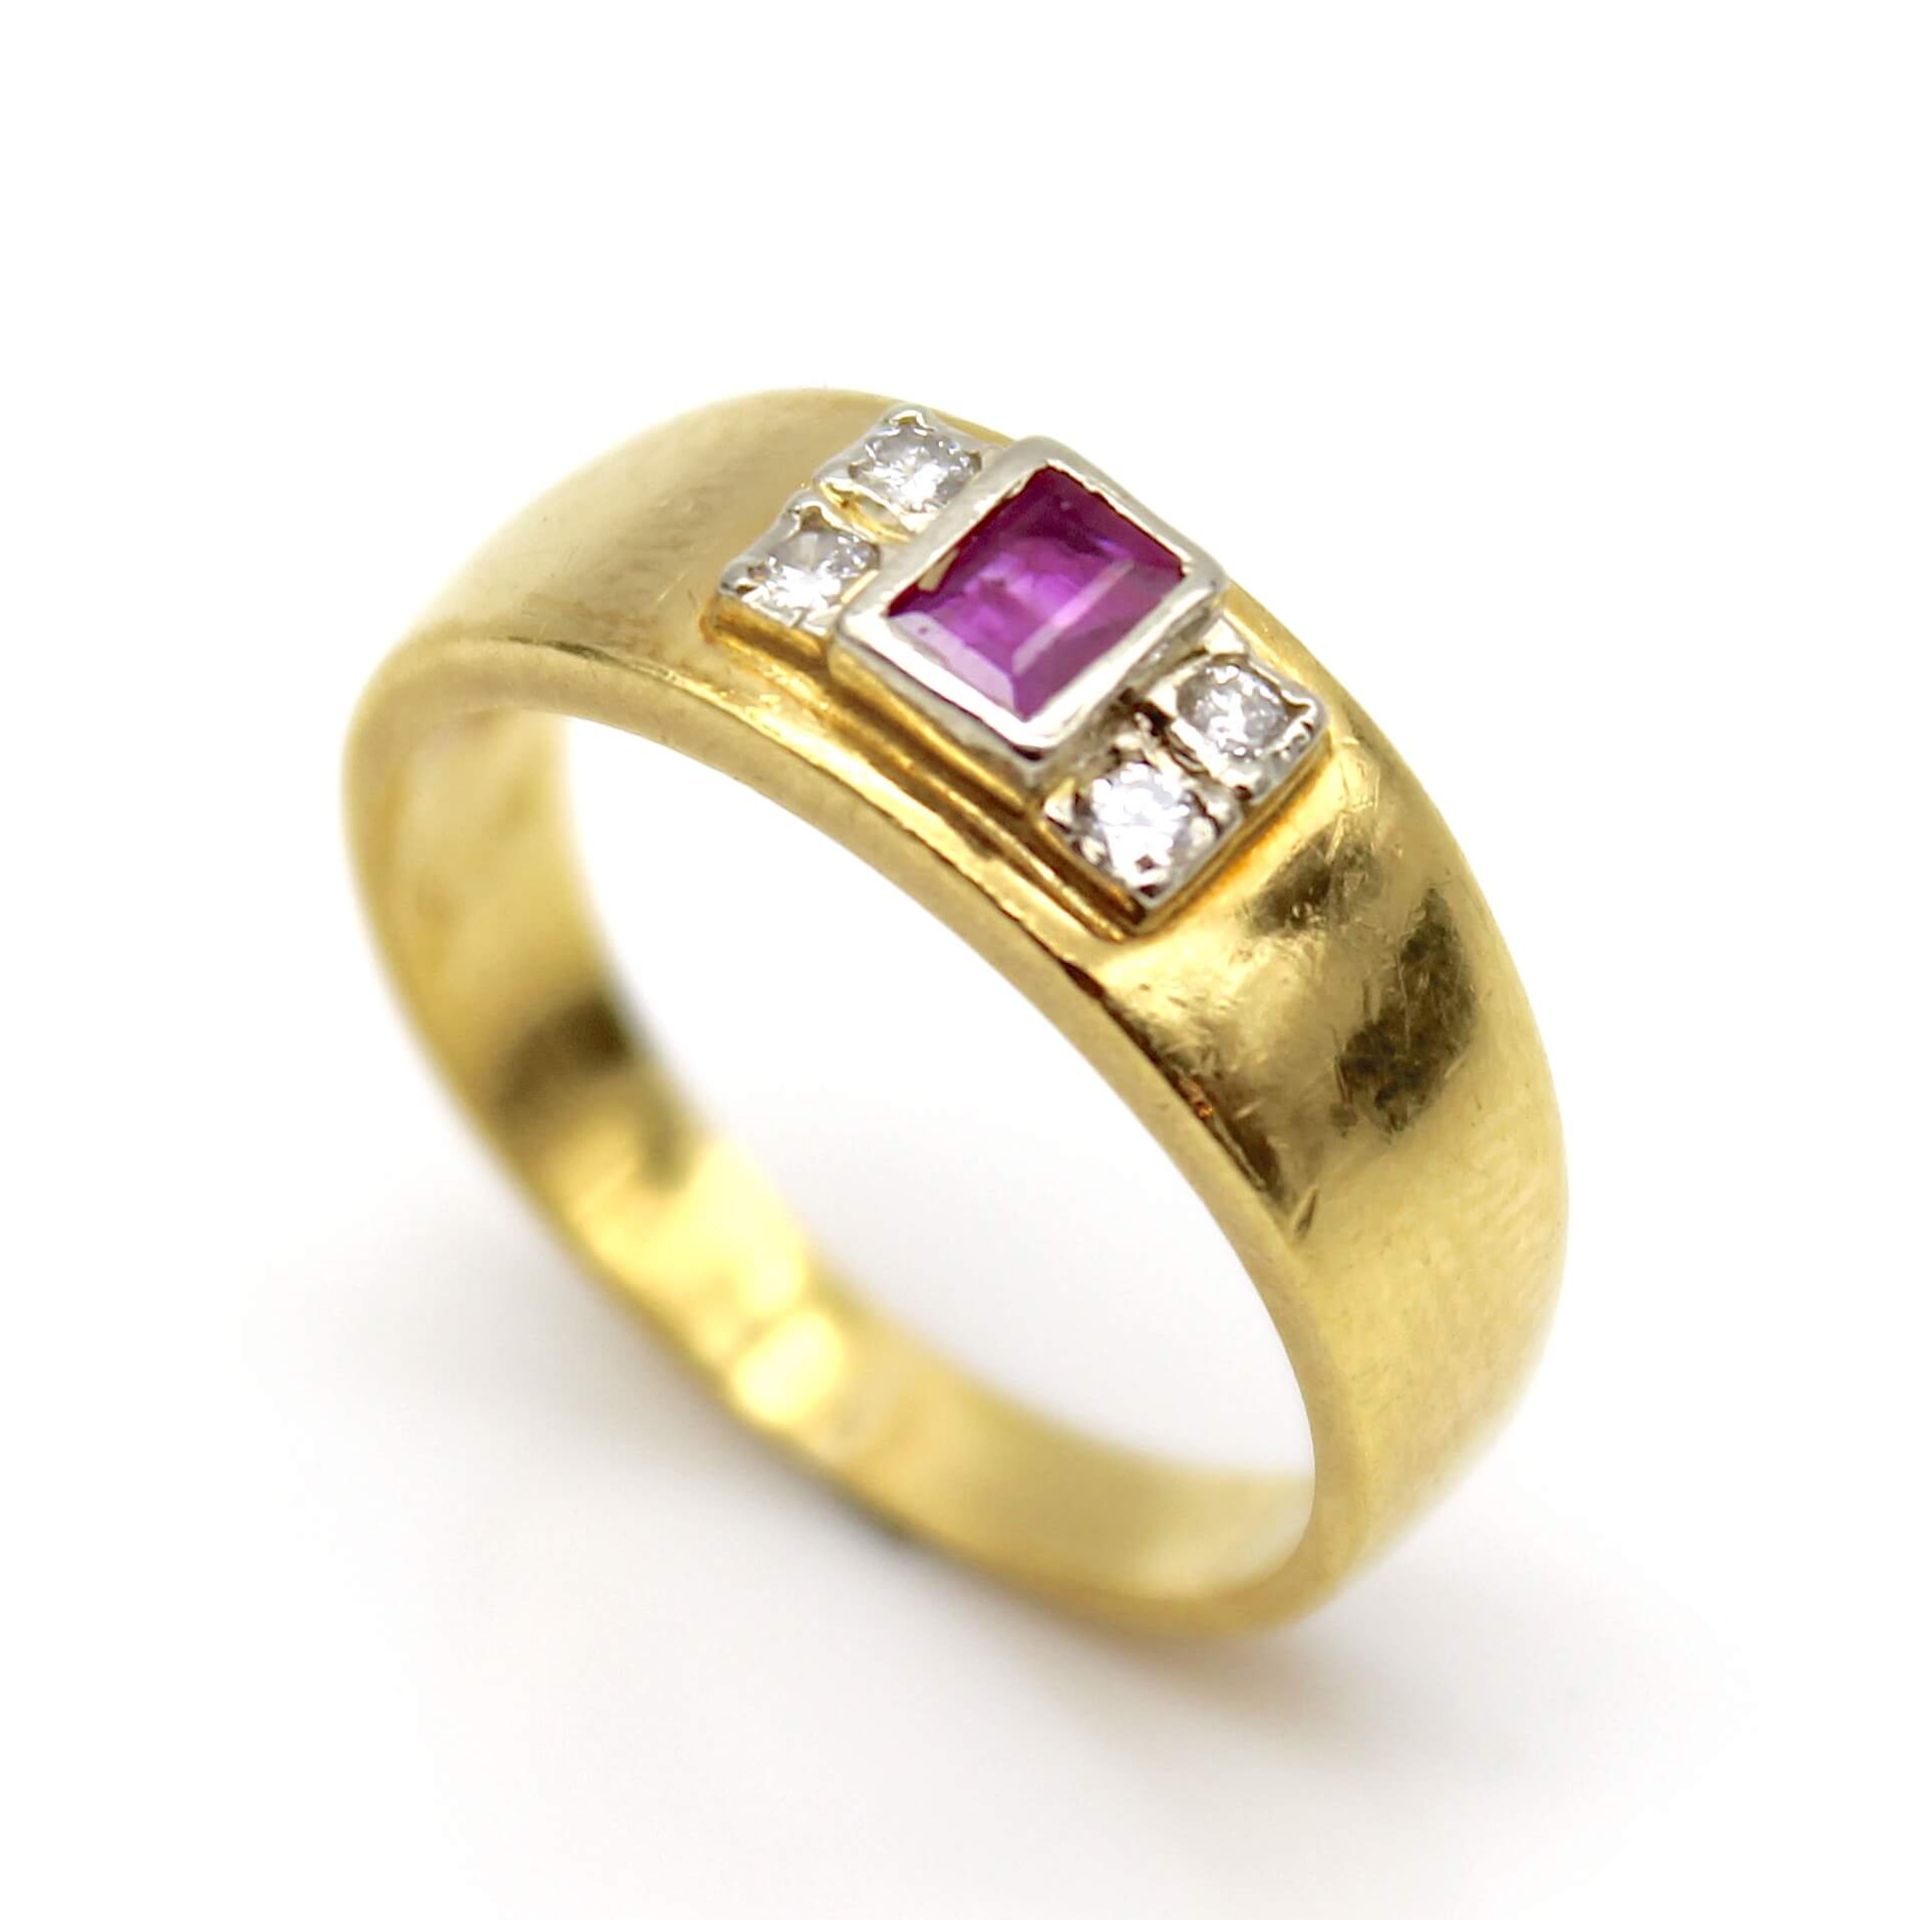 Ring with brilliants and ruby - Image 2 of 3